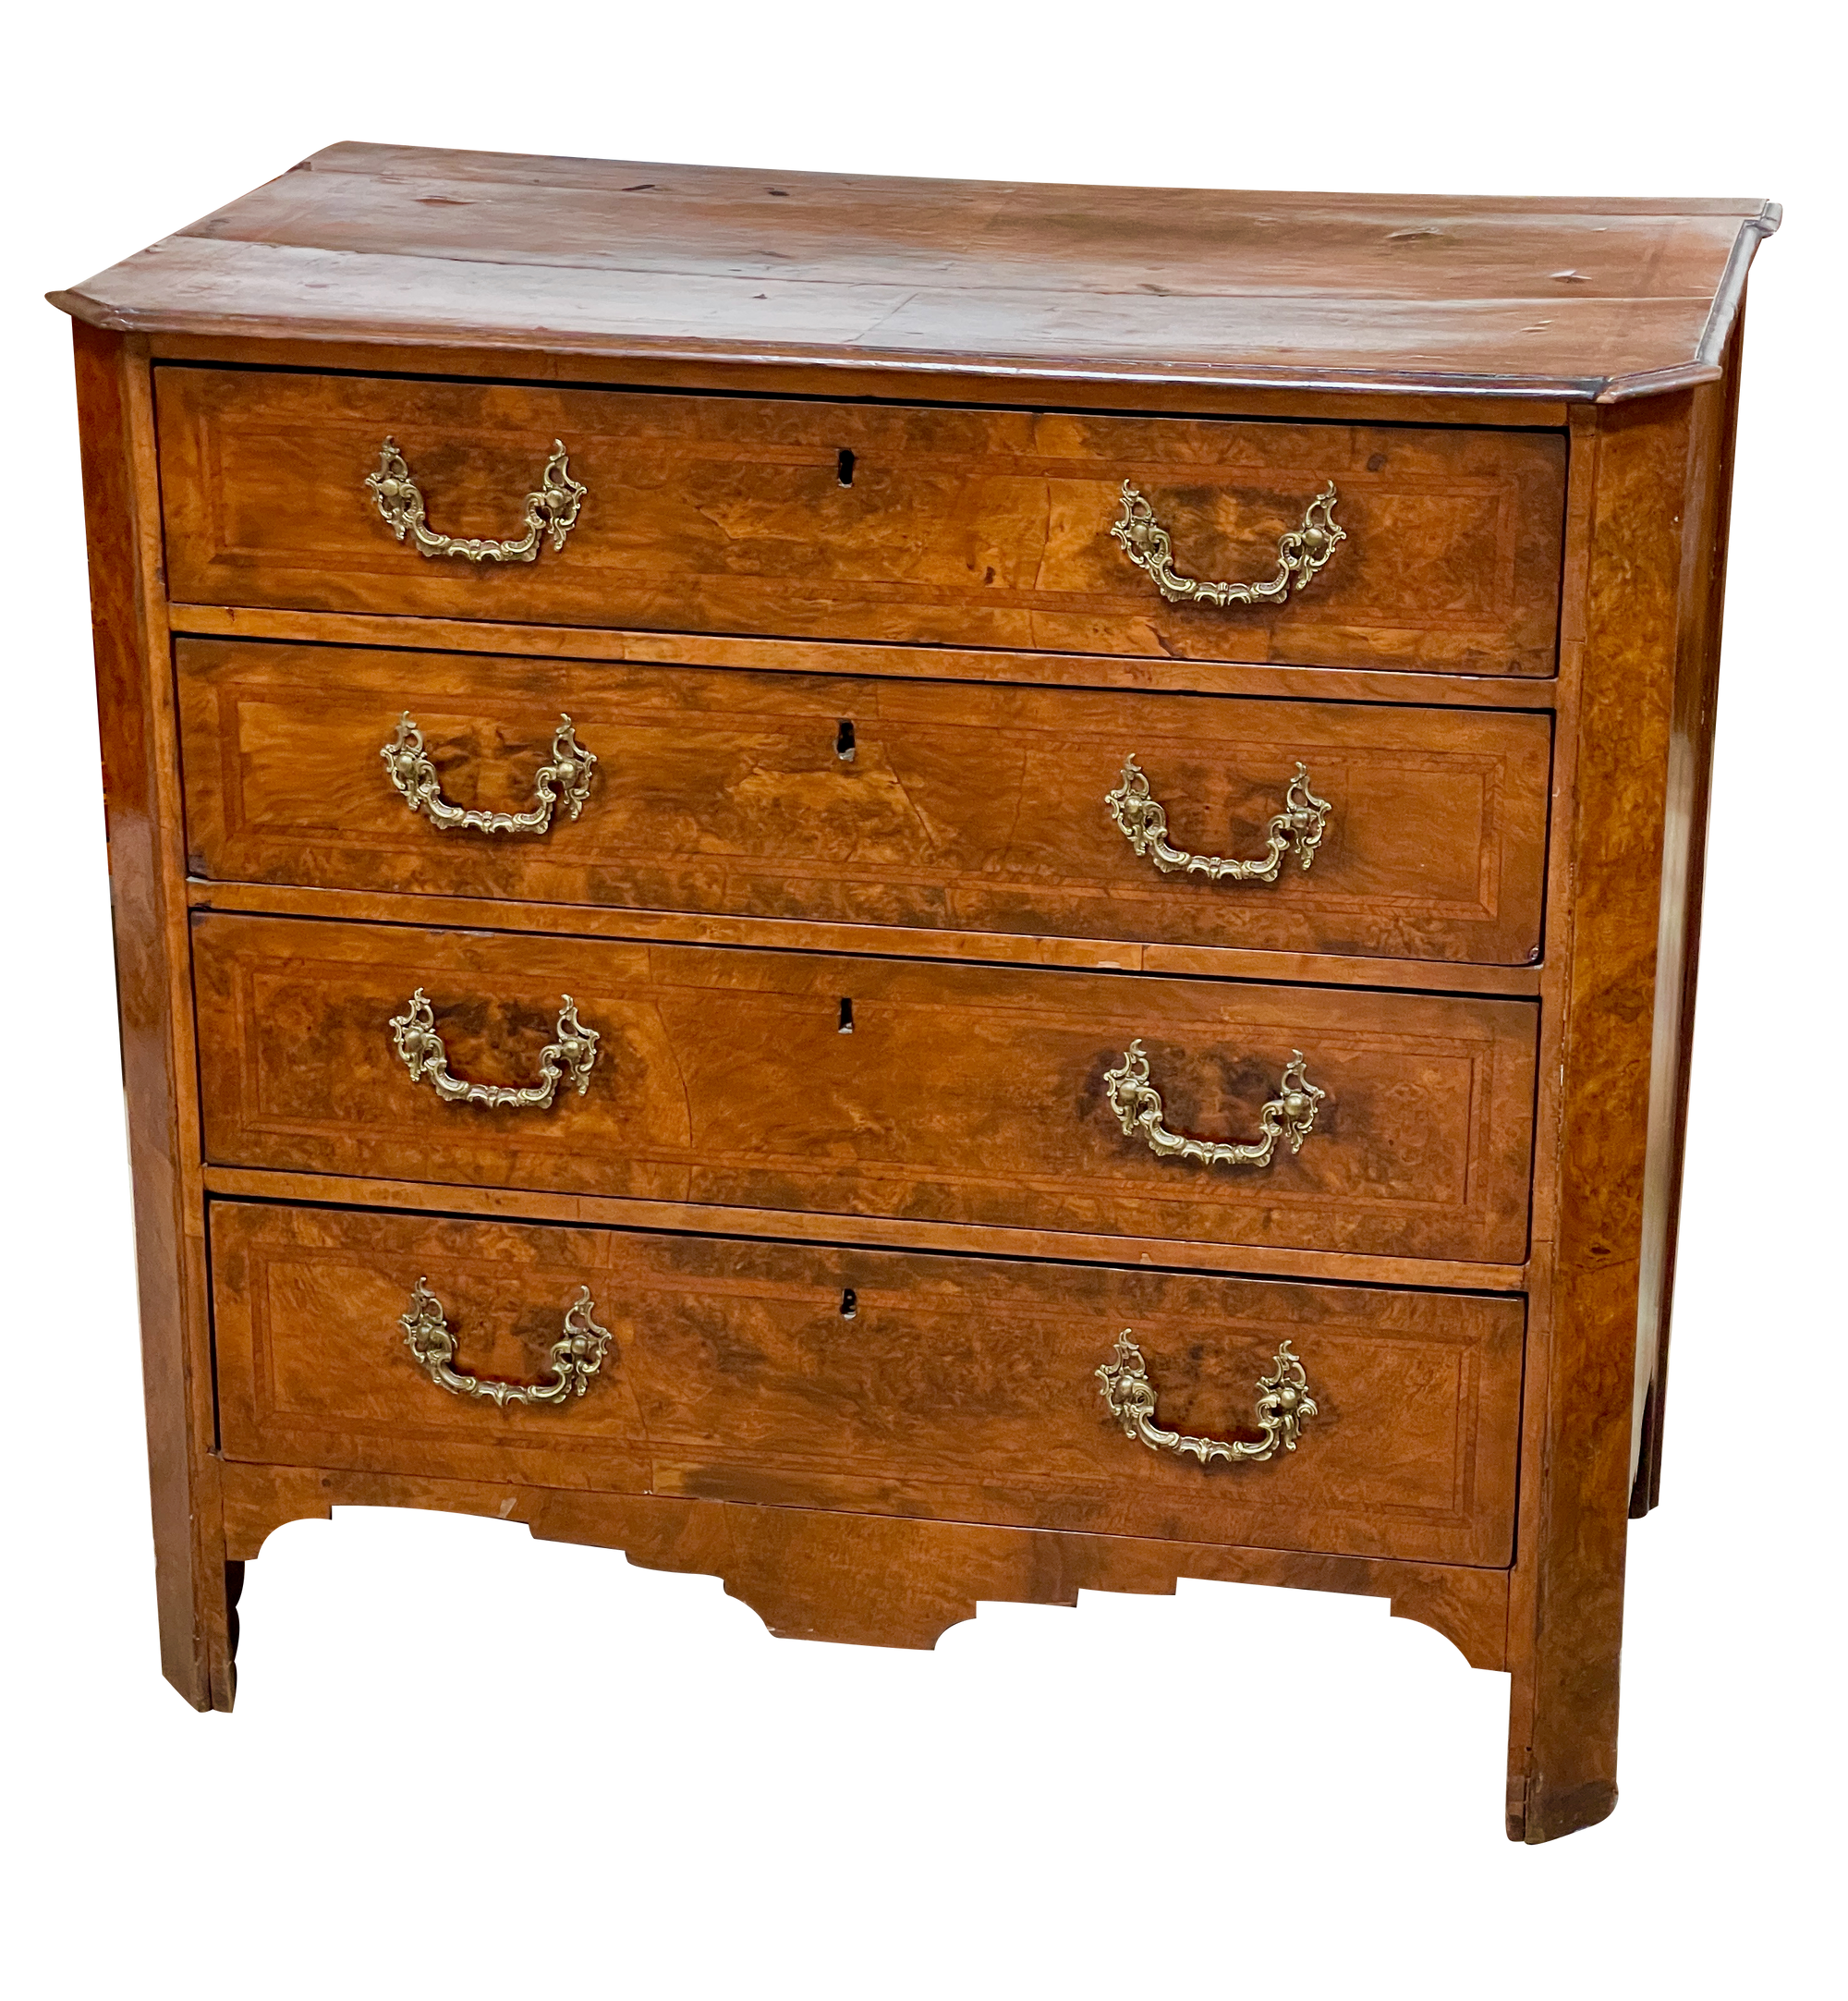 18th Century Georgian Chest in Burled Walnut Veneer with Four Drawers